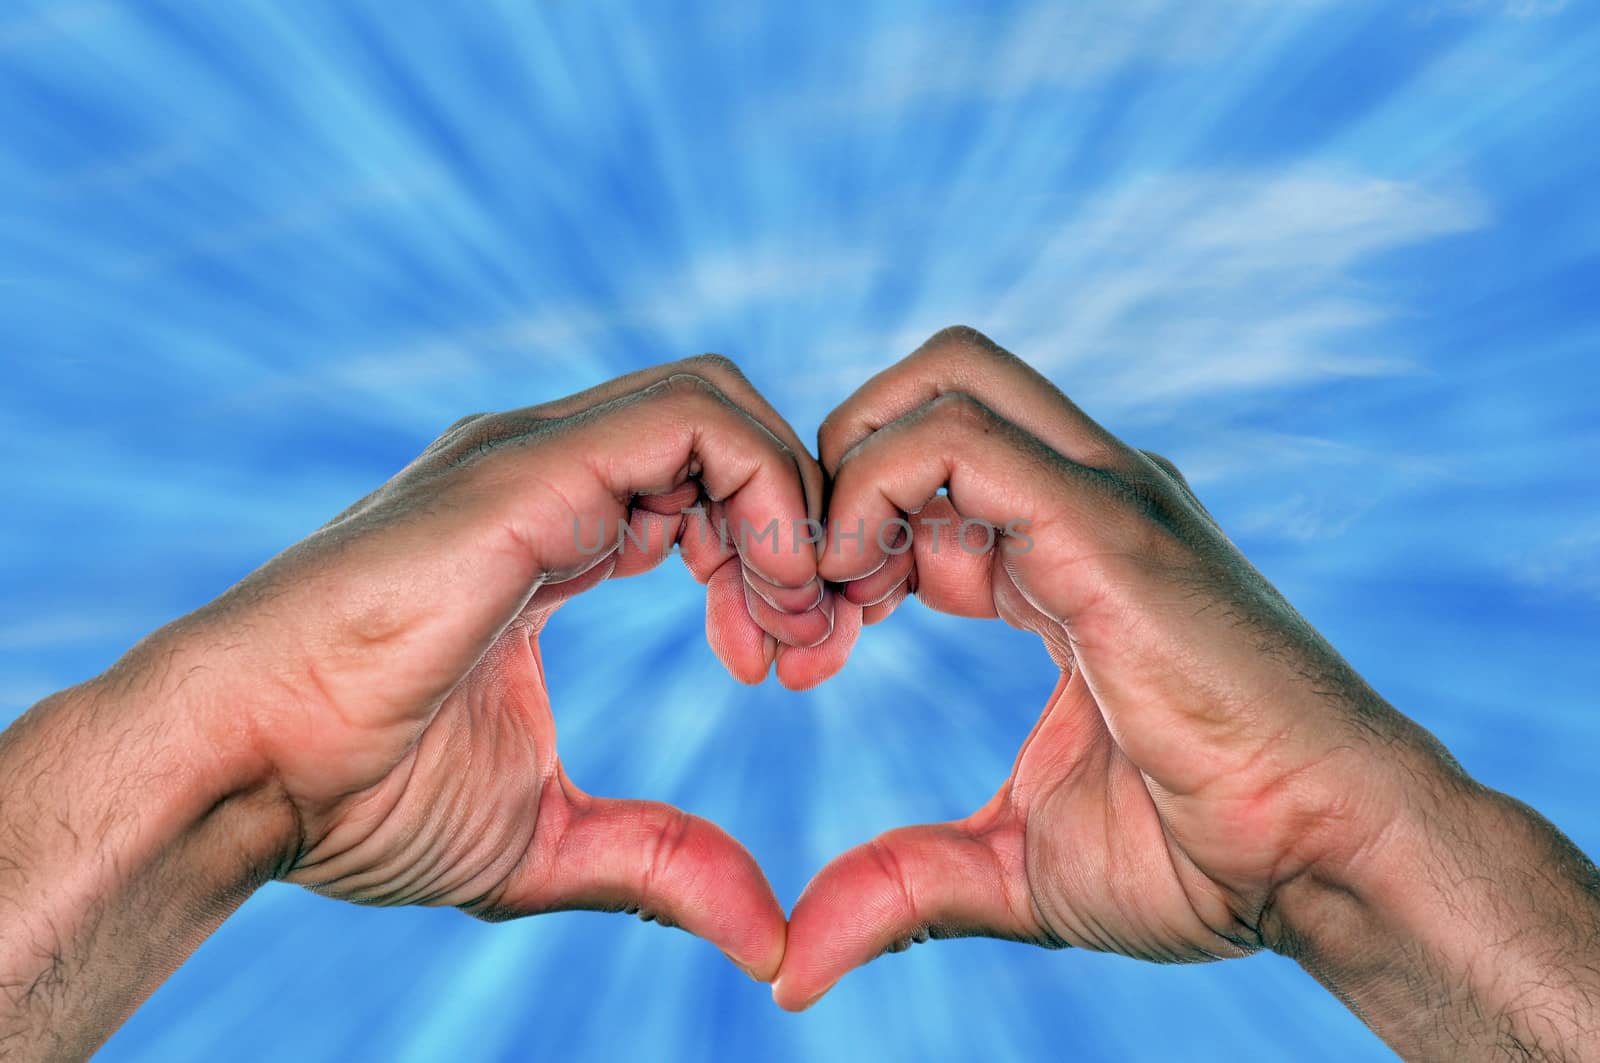 hands making heart shape against sky with sun rays for love concept